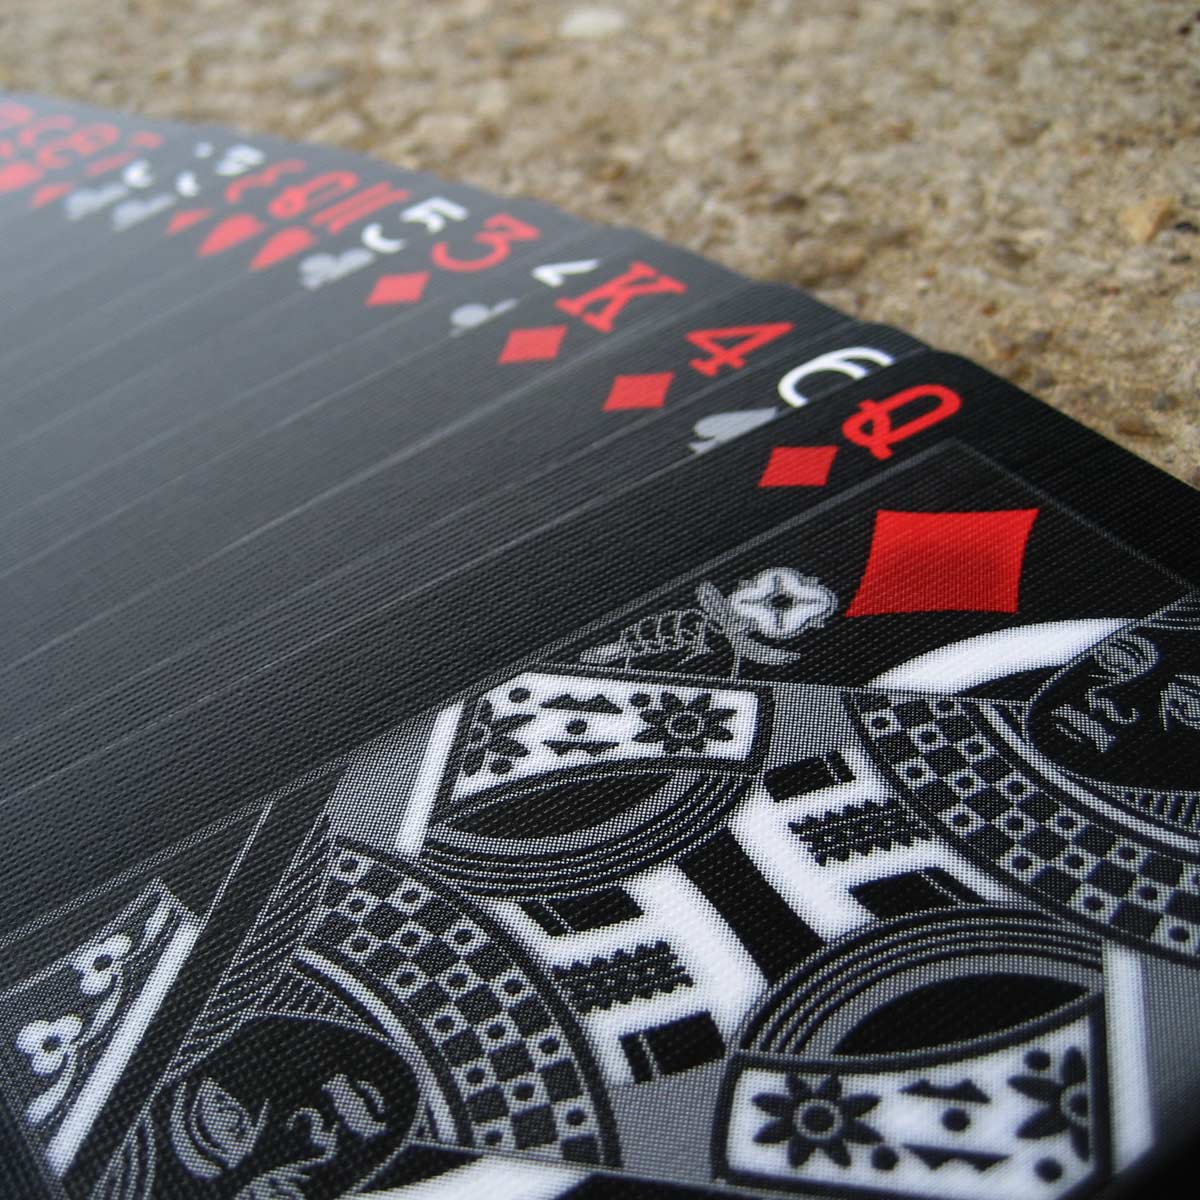 card poker player poker card player standard deck of playing cards ...